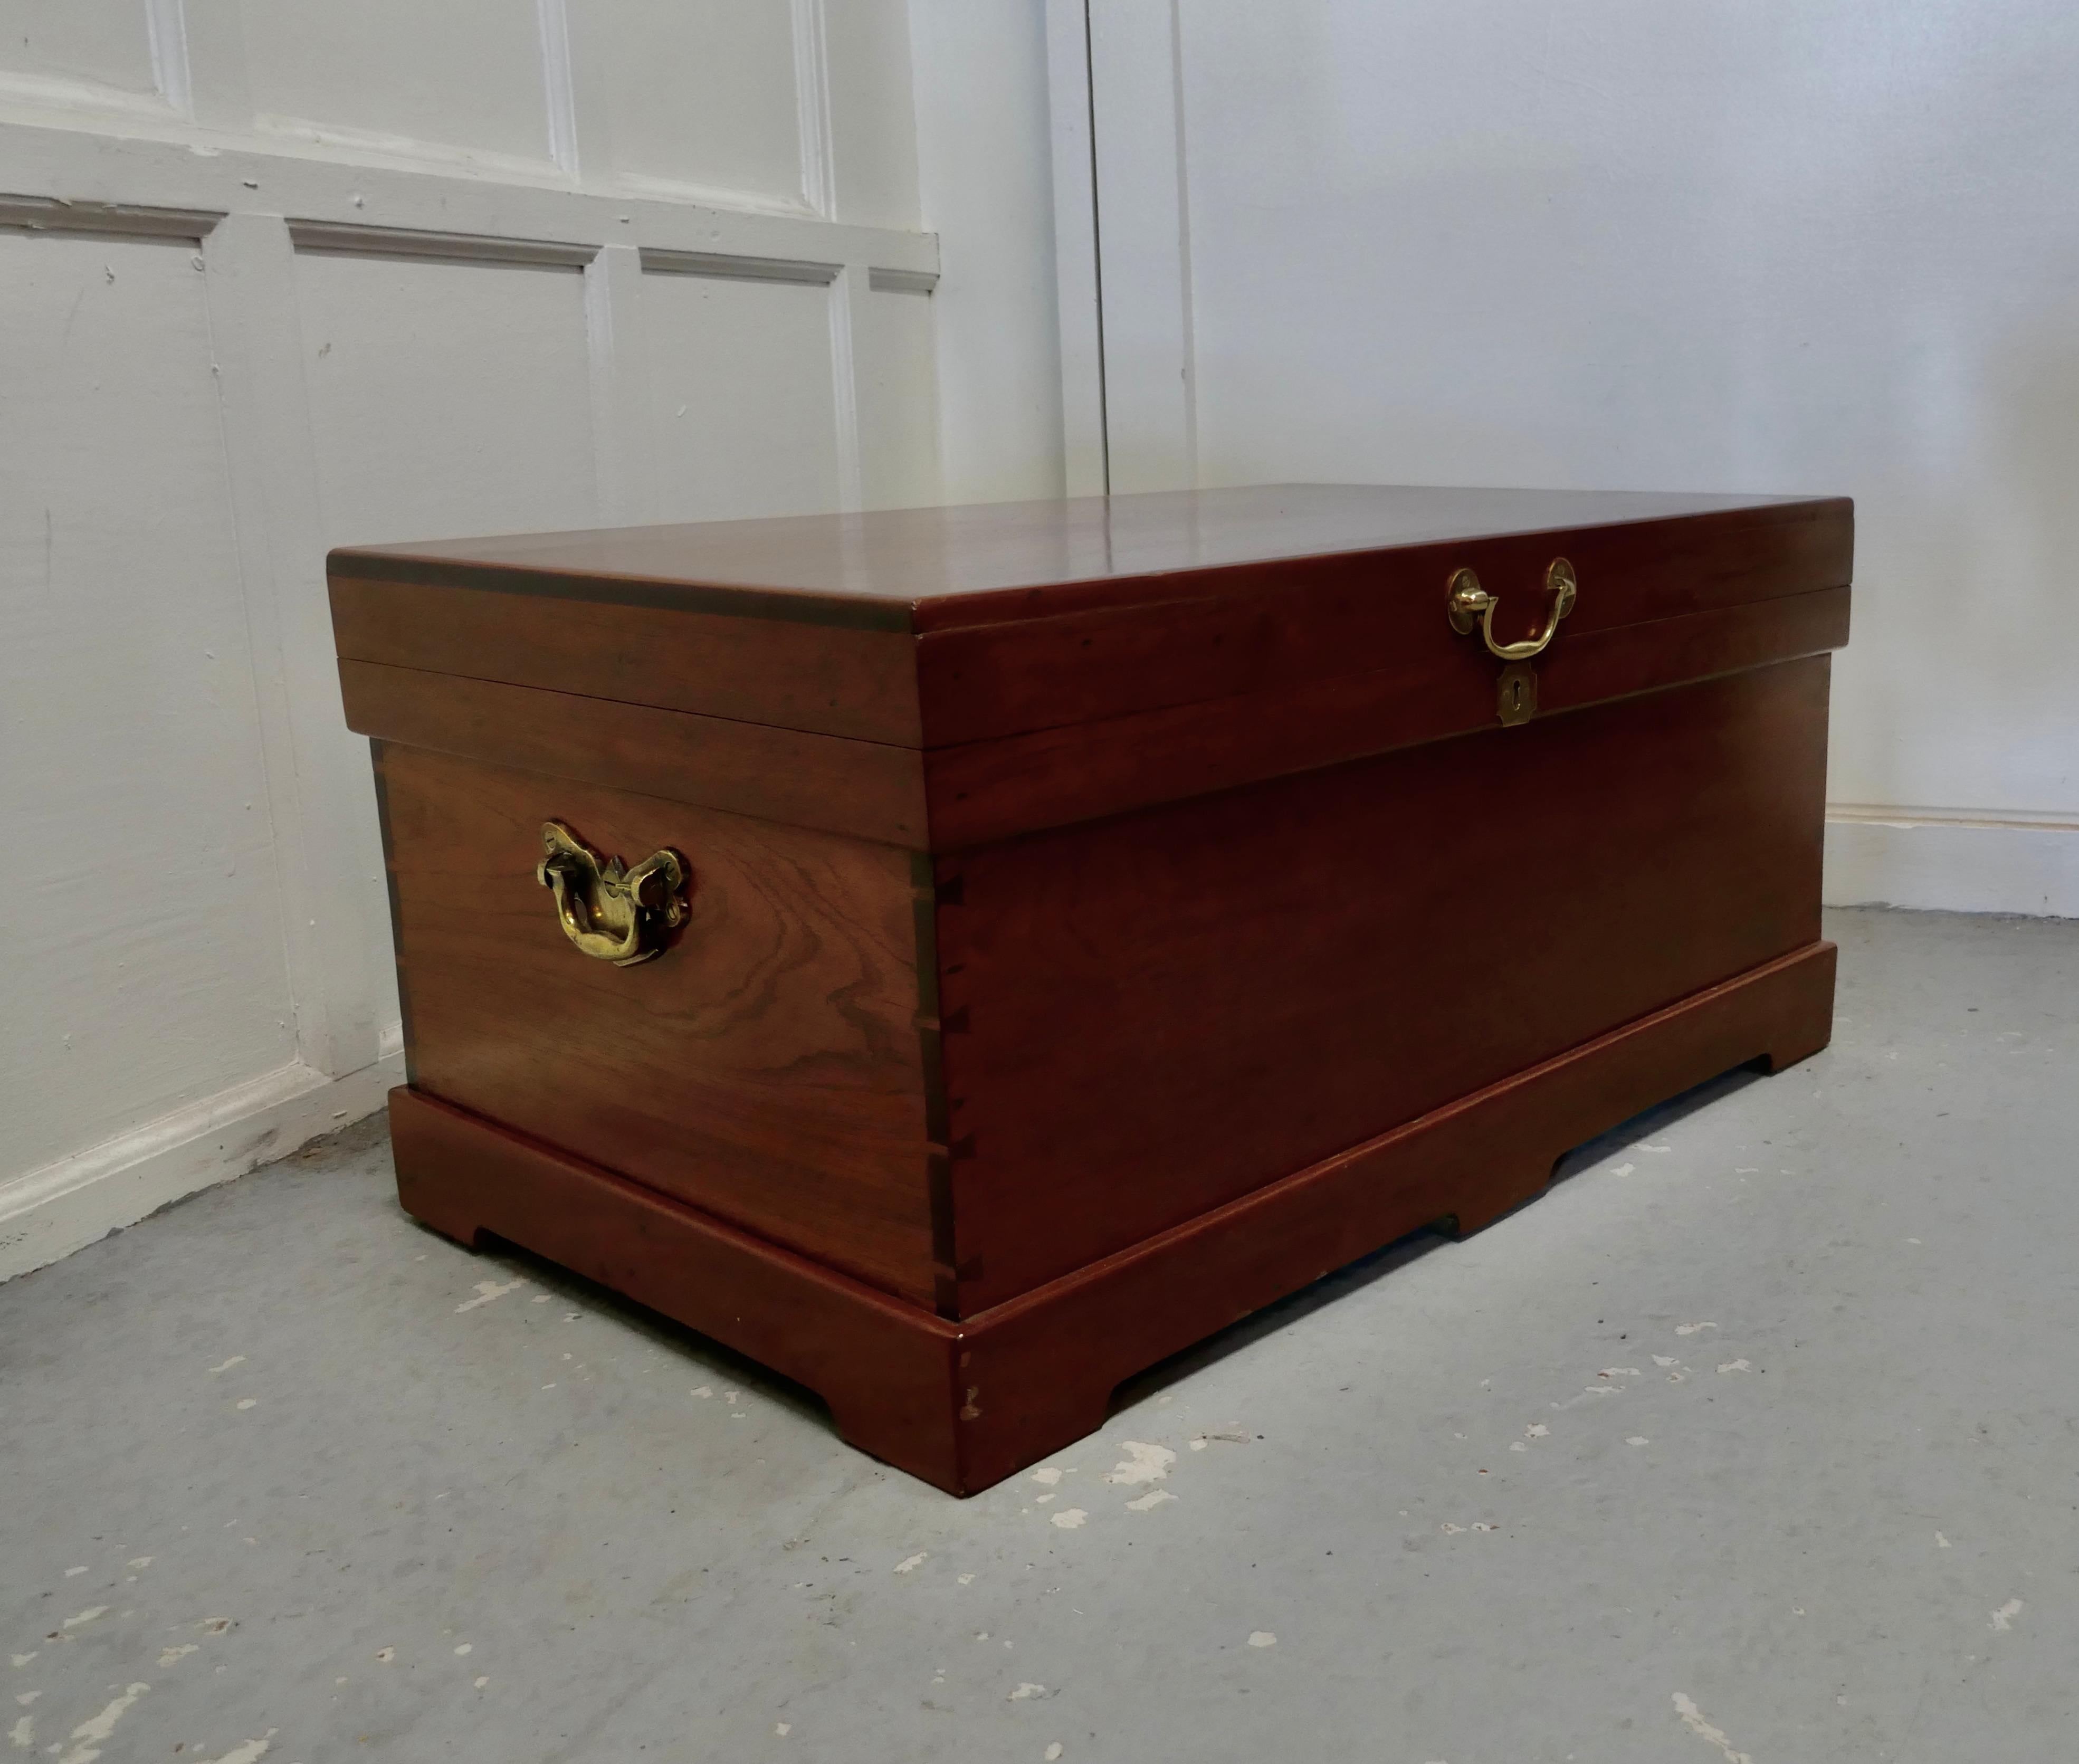 Large 19th century sea chest with. Brass handles, coffee table

This is a beautiful looking and fine quality Campaign chest
The chest stands on a sturdy plinth that runs around the whole off the base, it has brass carrying handles, it also has